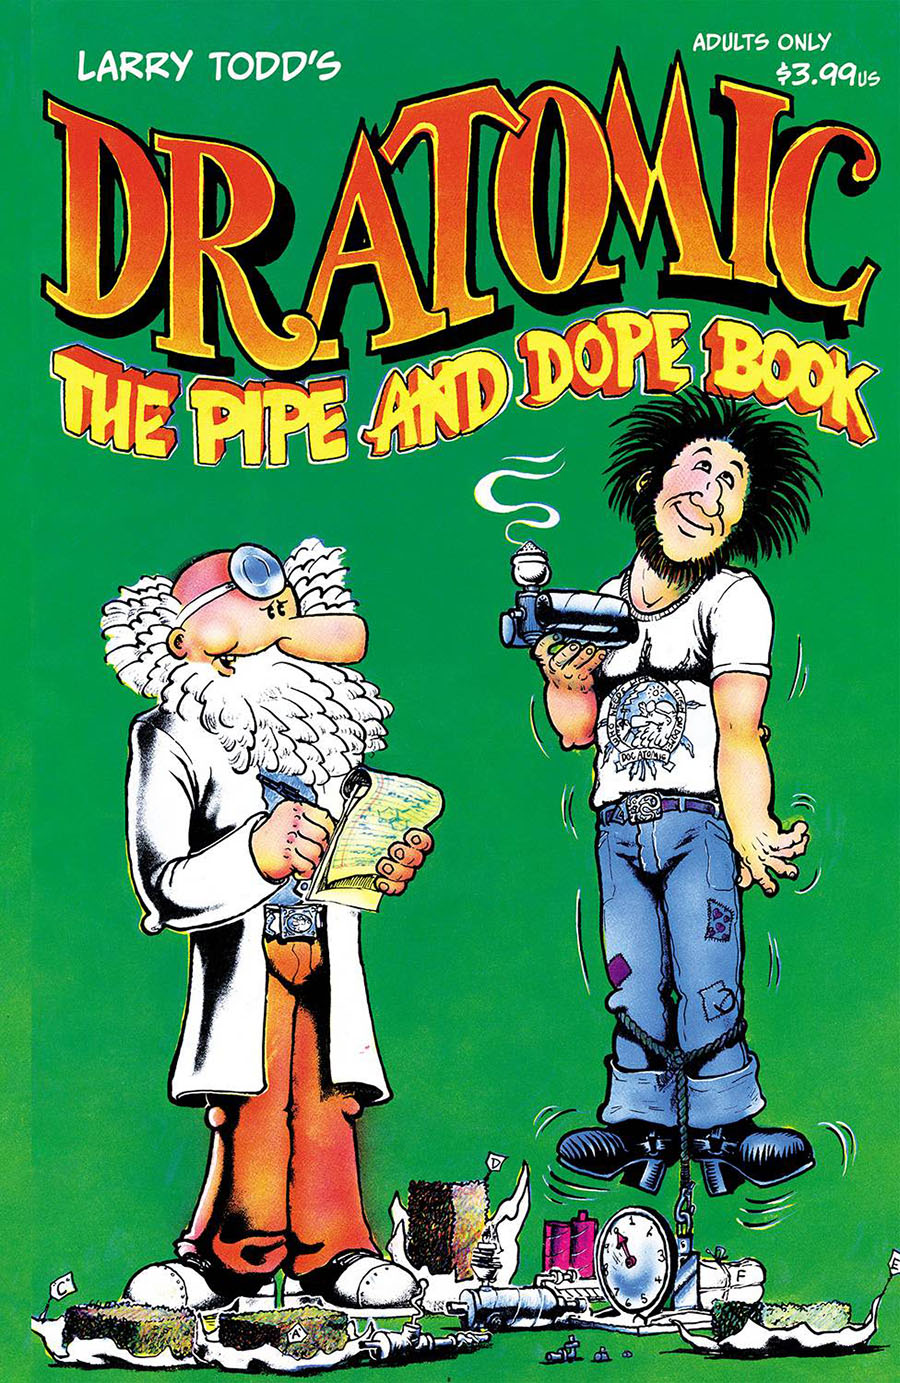 Dr Atomic The Pipe And Dope Book #1 (One Shot) Cover A Regular Larry Todd Cover